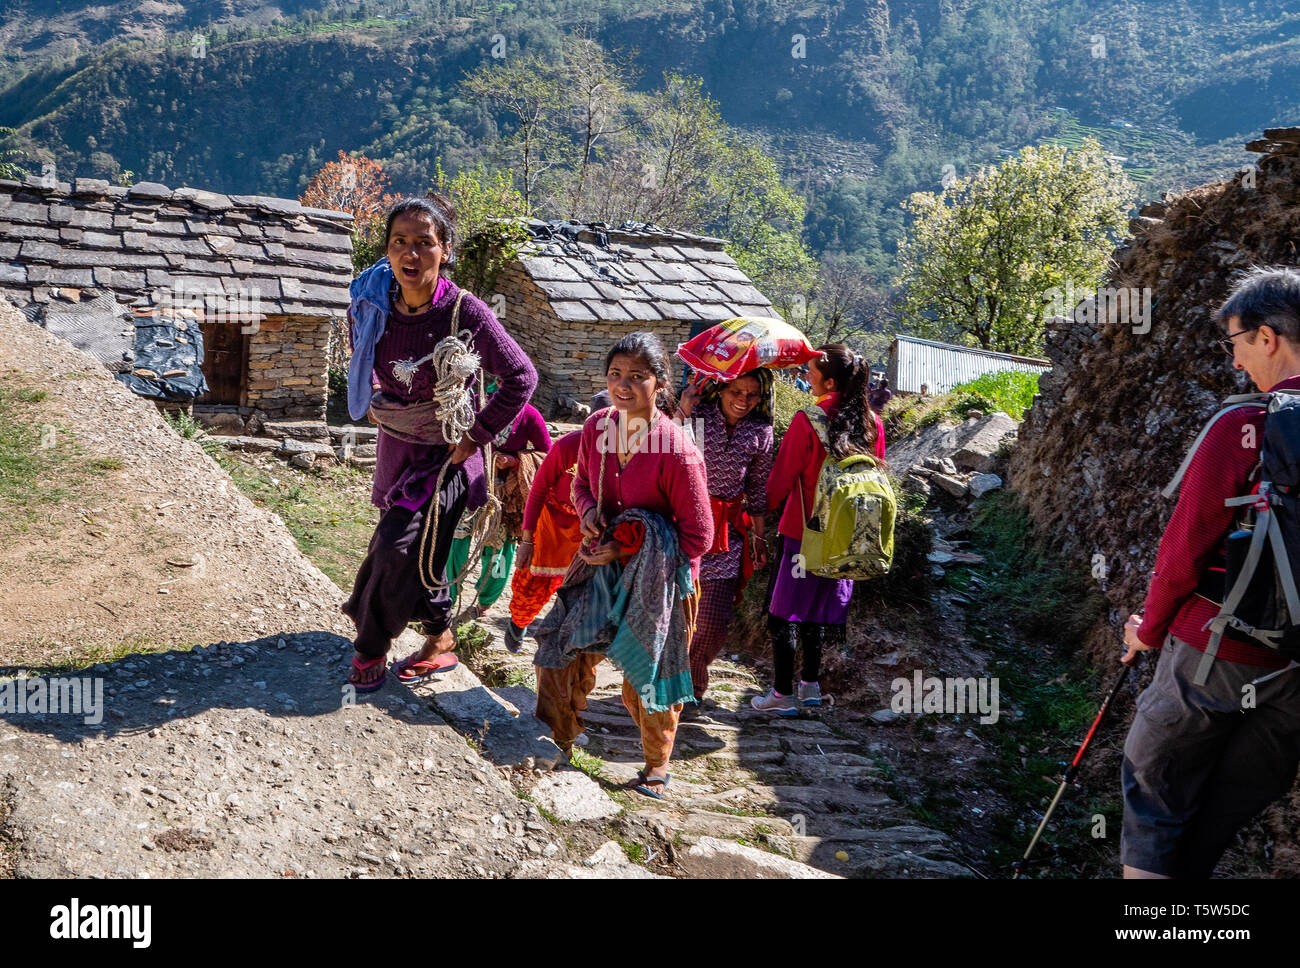 Happy smiling women and children passing a European walker on the steep path in the village of Supi in the Uttarakhand Himalayas of Northern India Stock Photo